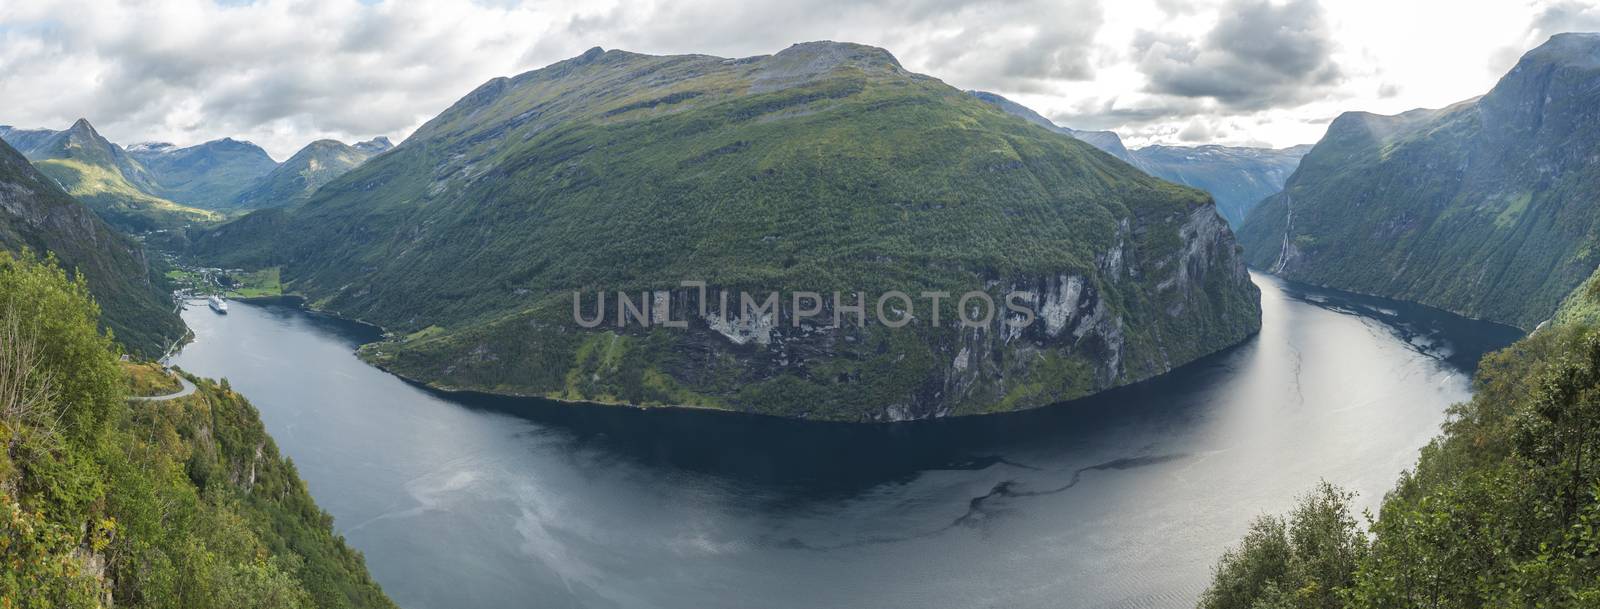 Panorama of Geirangerfjord in Sunnmore region, Norway, one of the most beautiful fjords in the world, included on the UNESCO World Heritage. View from Ornesvingen eagle road viewpoint, early autumn, cloudy day. by Henkeova